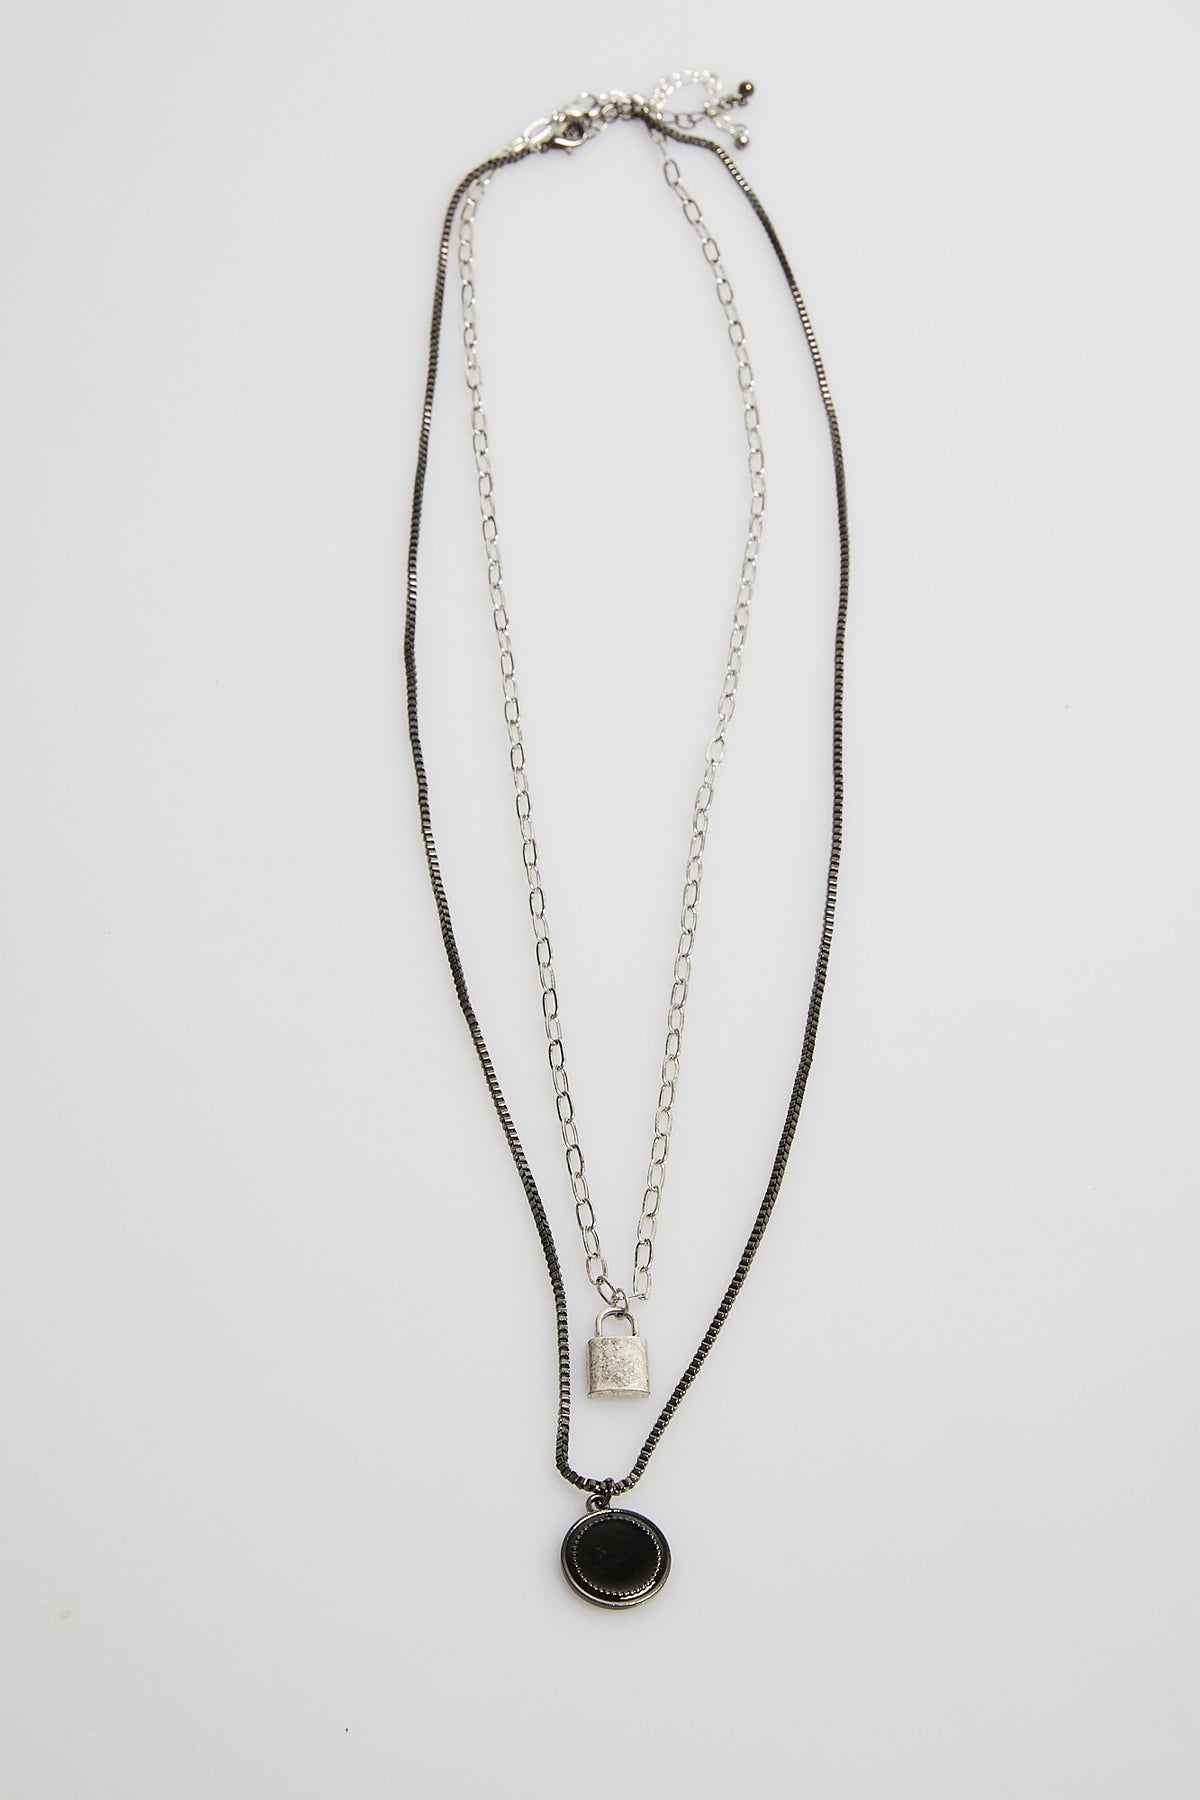 NTH Multi Chain Lock Necklace Silver NTH20201026